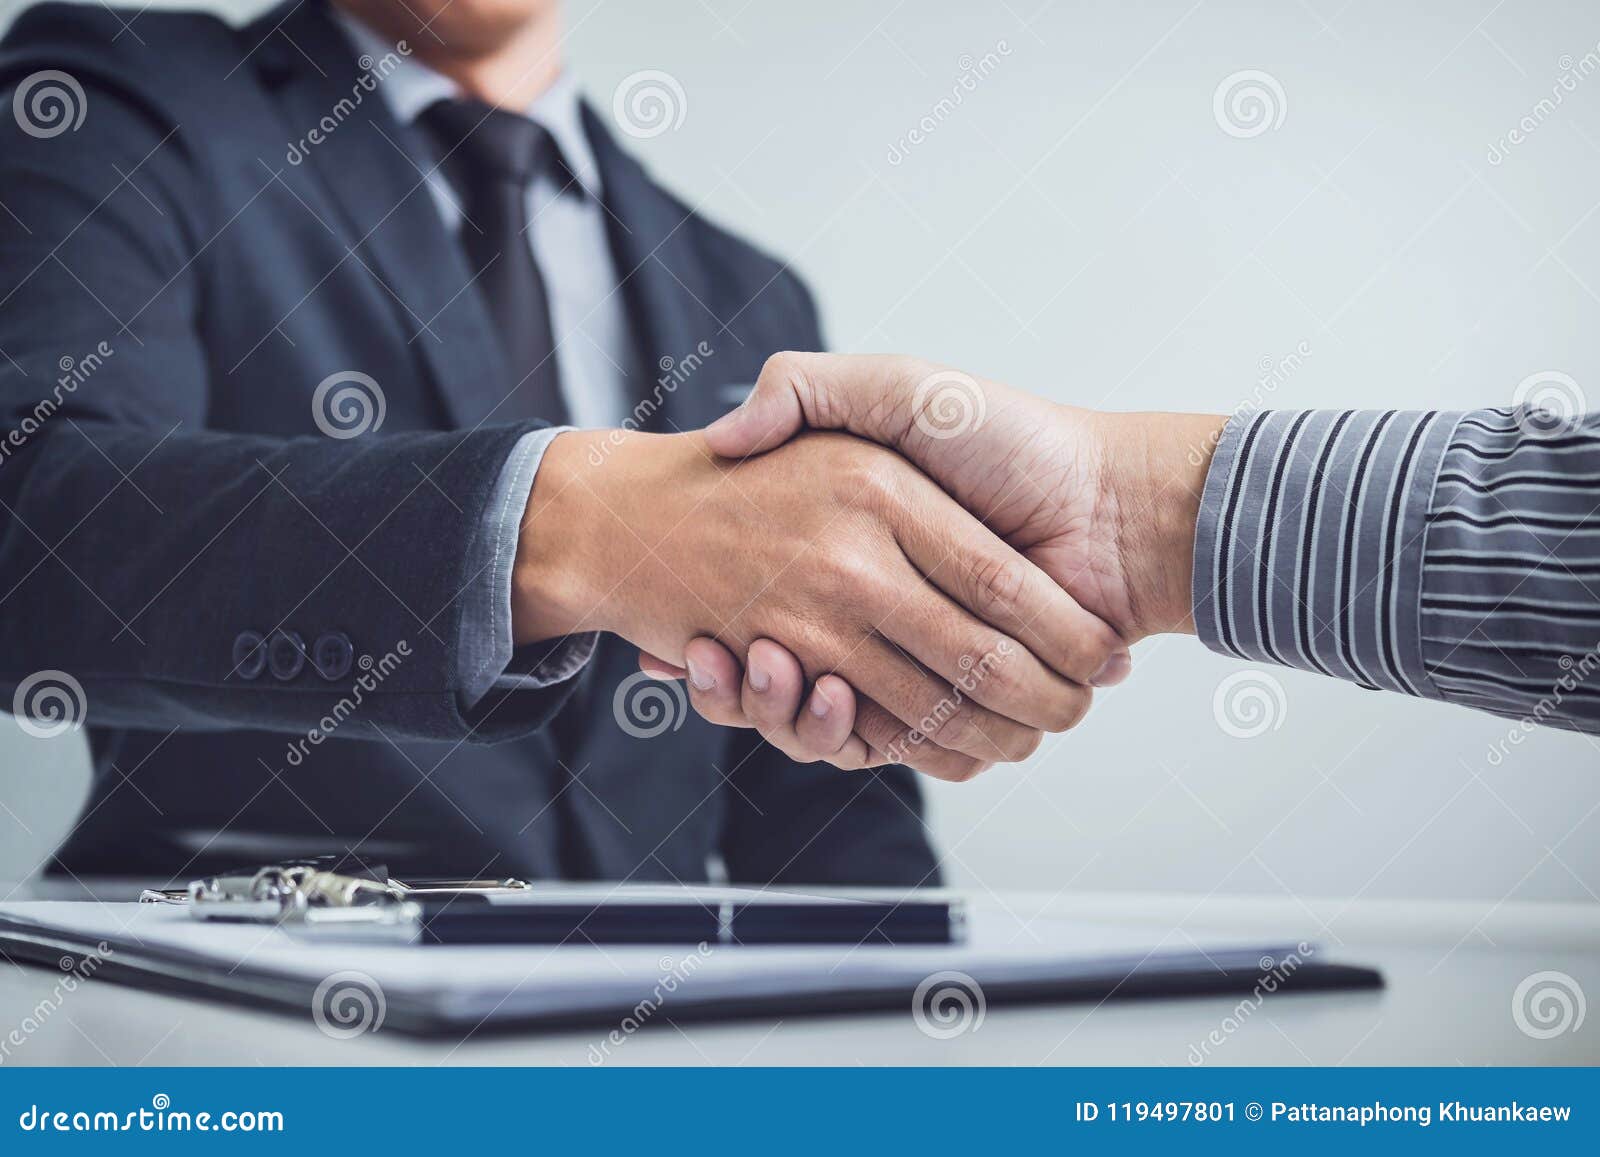 handshake of cooperation customer and salesman after agreement,